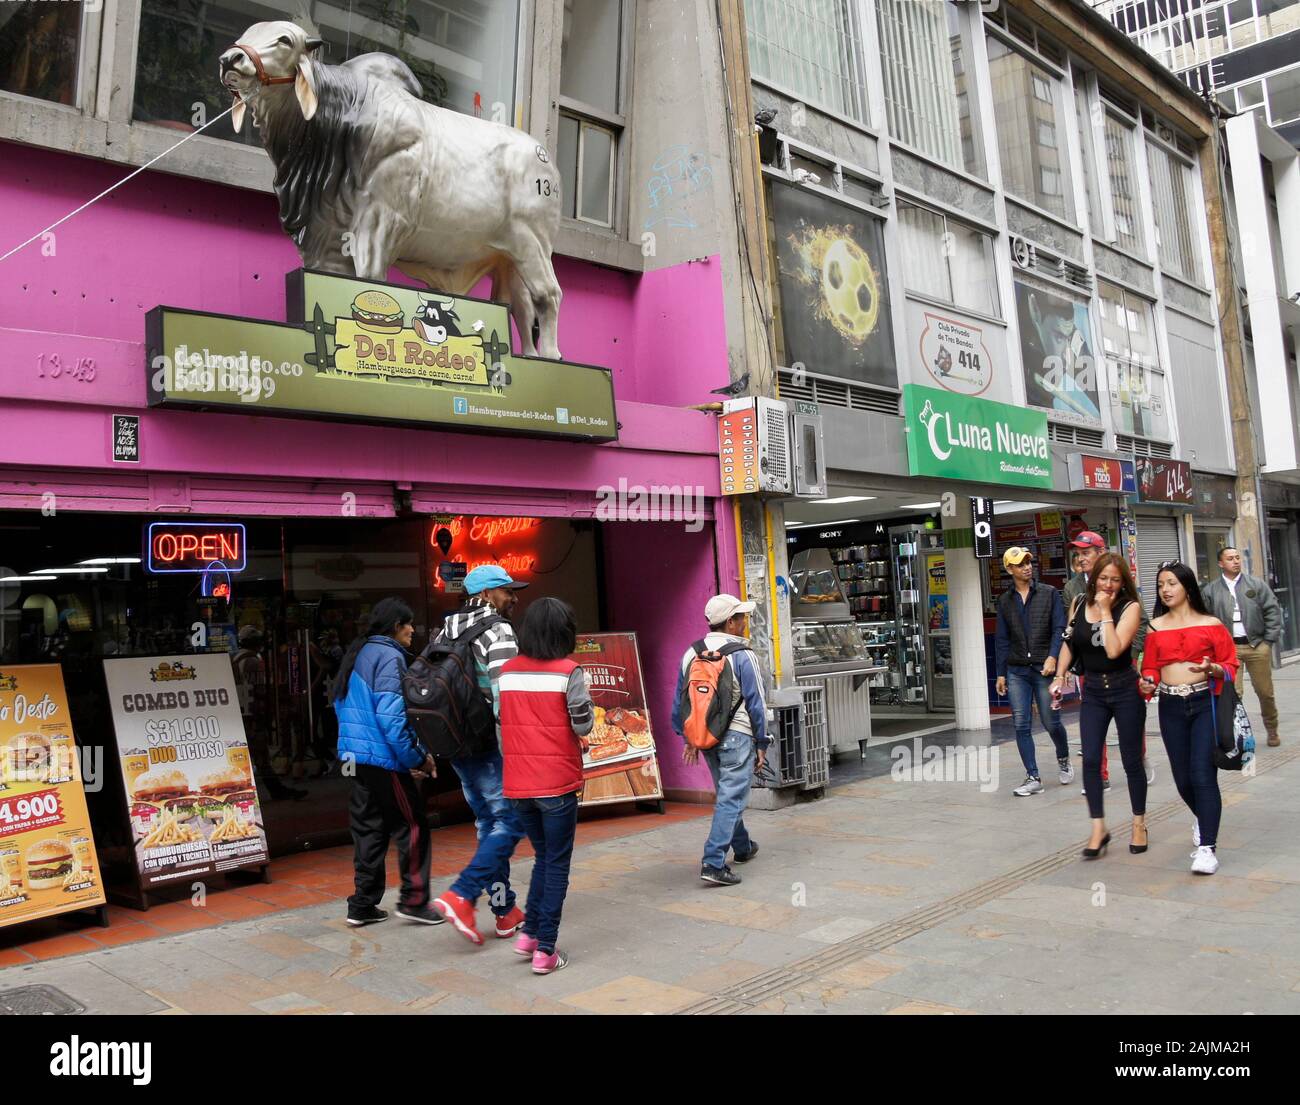 People walking past Del Rodeo restaurant and stores along Carrera 7 in La Candelaria district of Bogota, Colombia Stock Photo